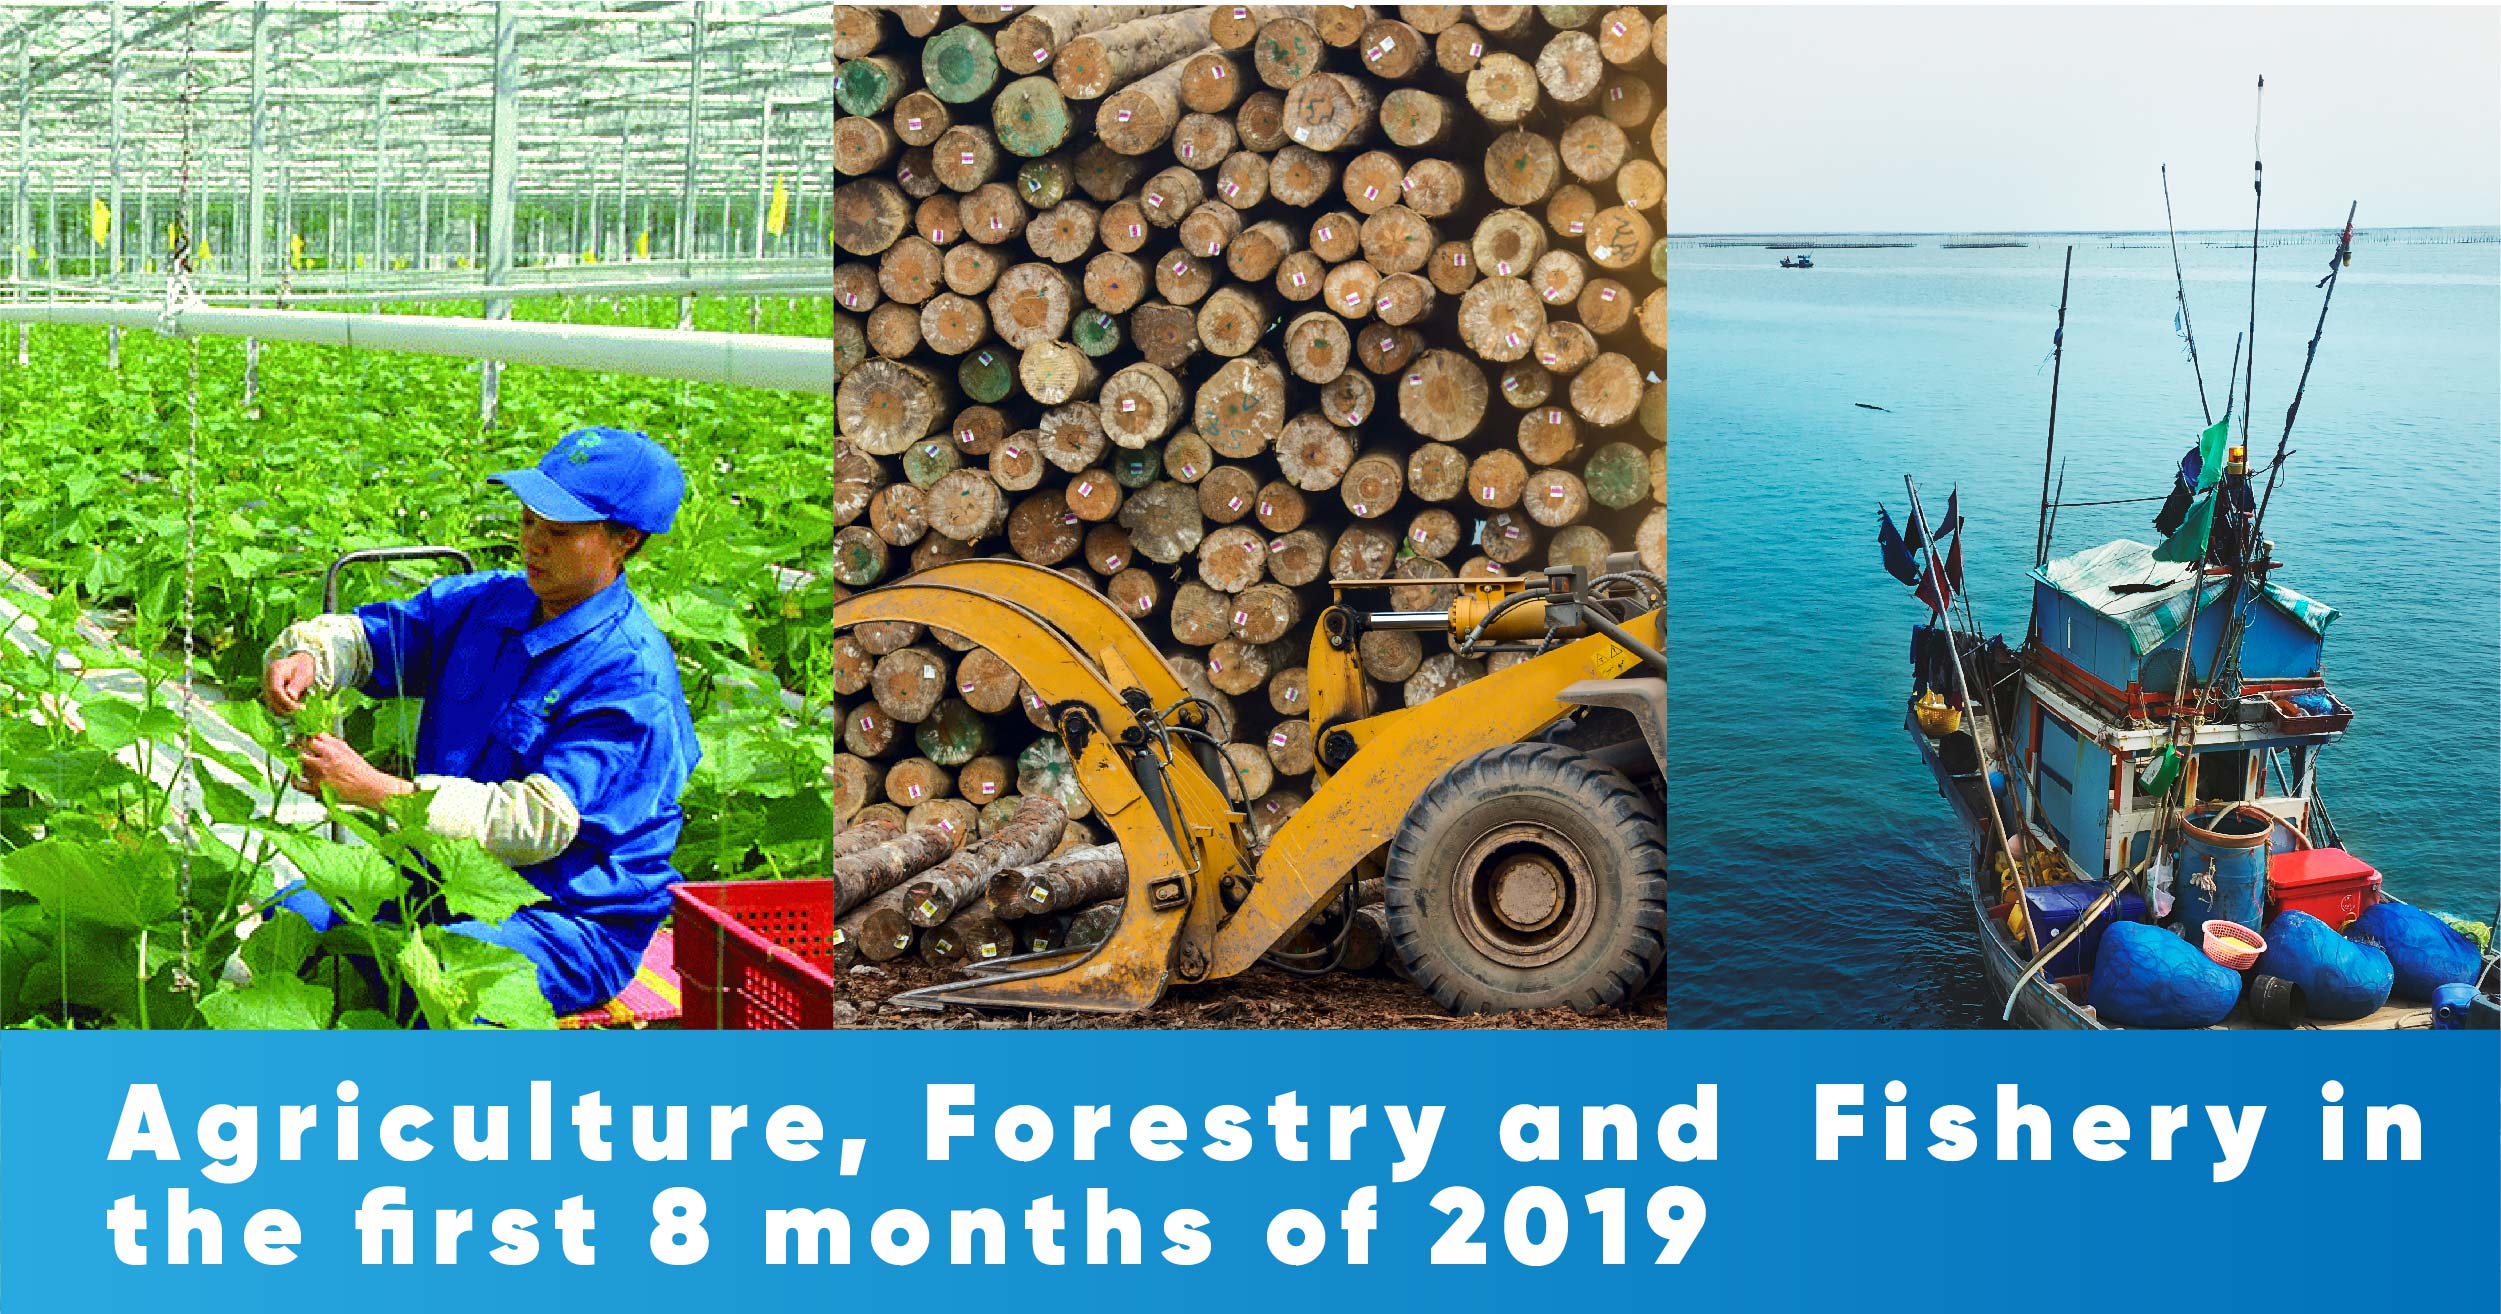 Agriculture, forestry and fishery in the first 8 months of 2019